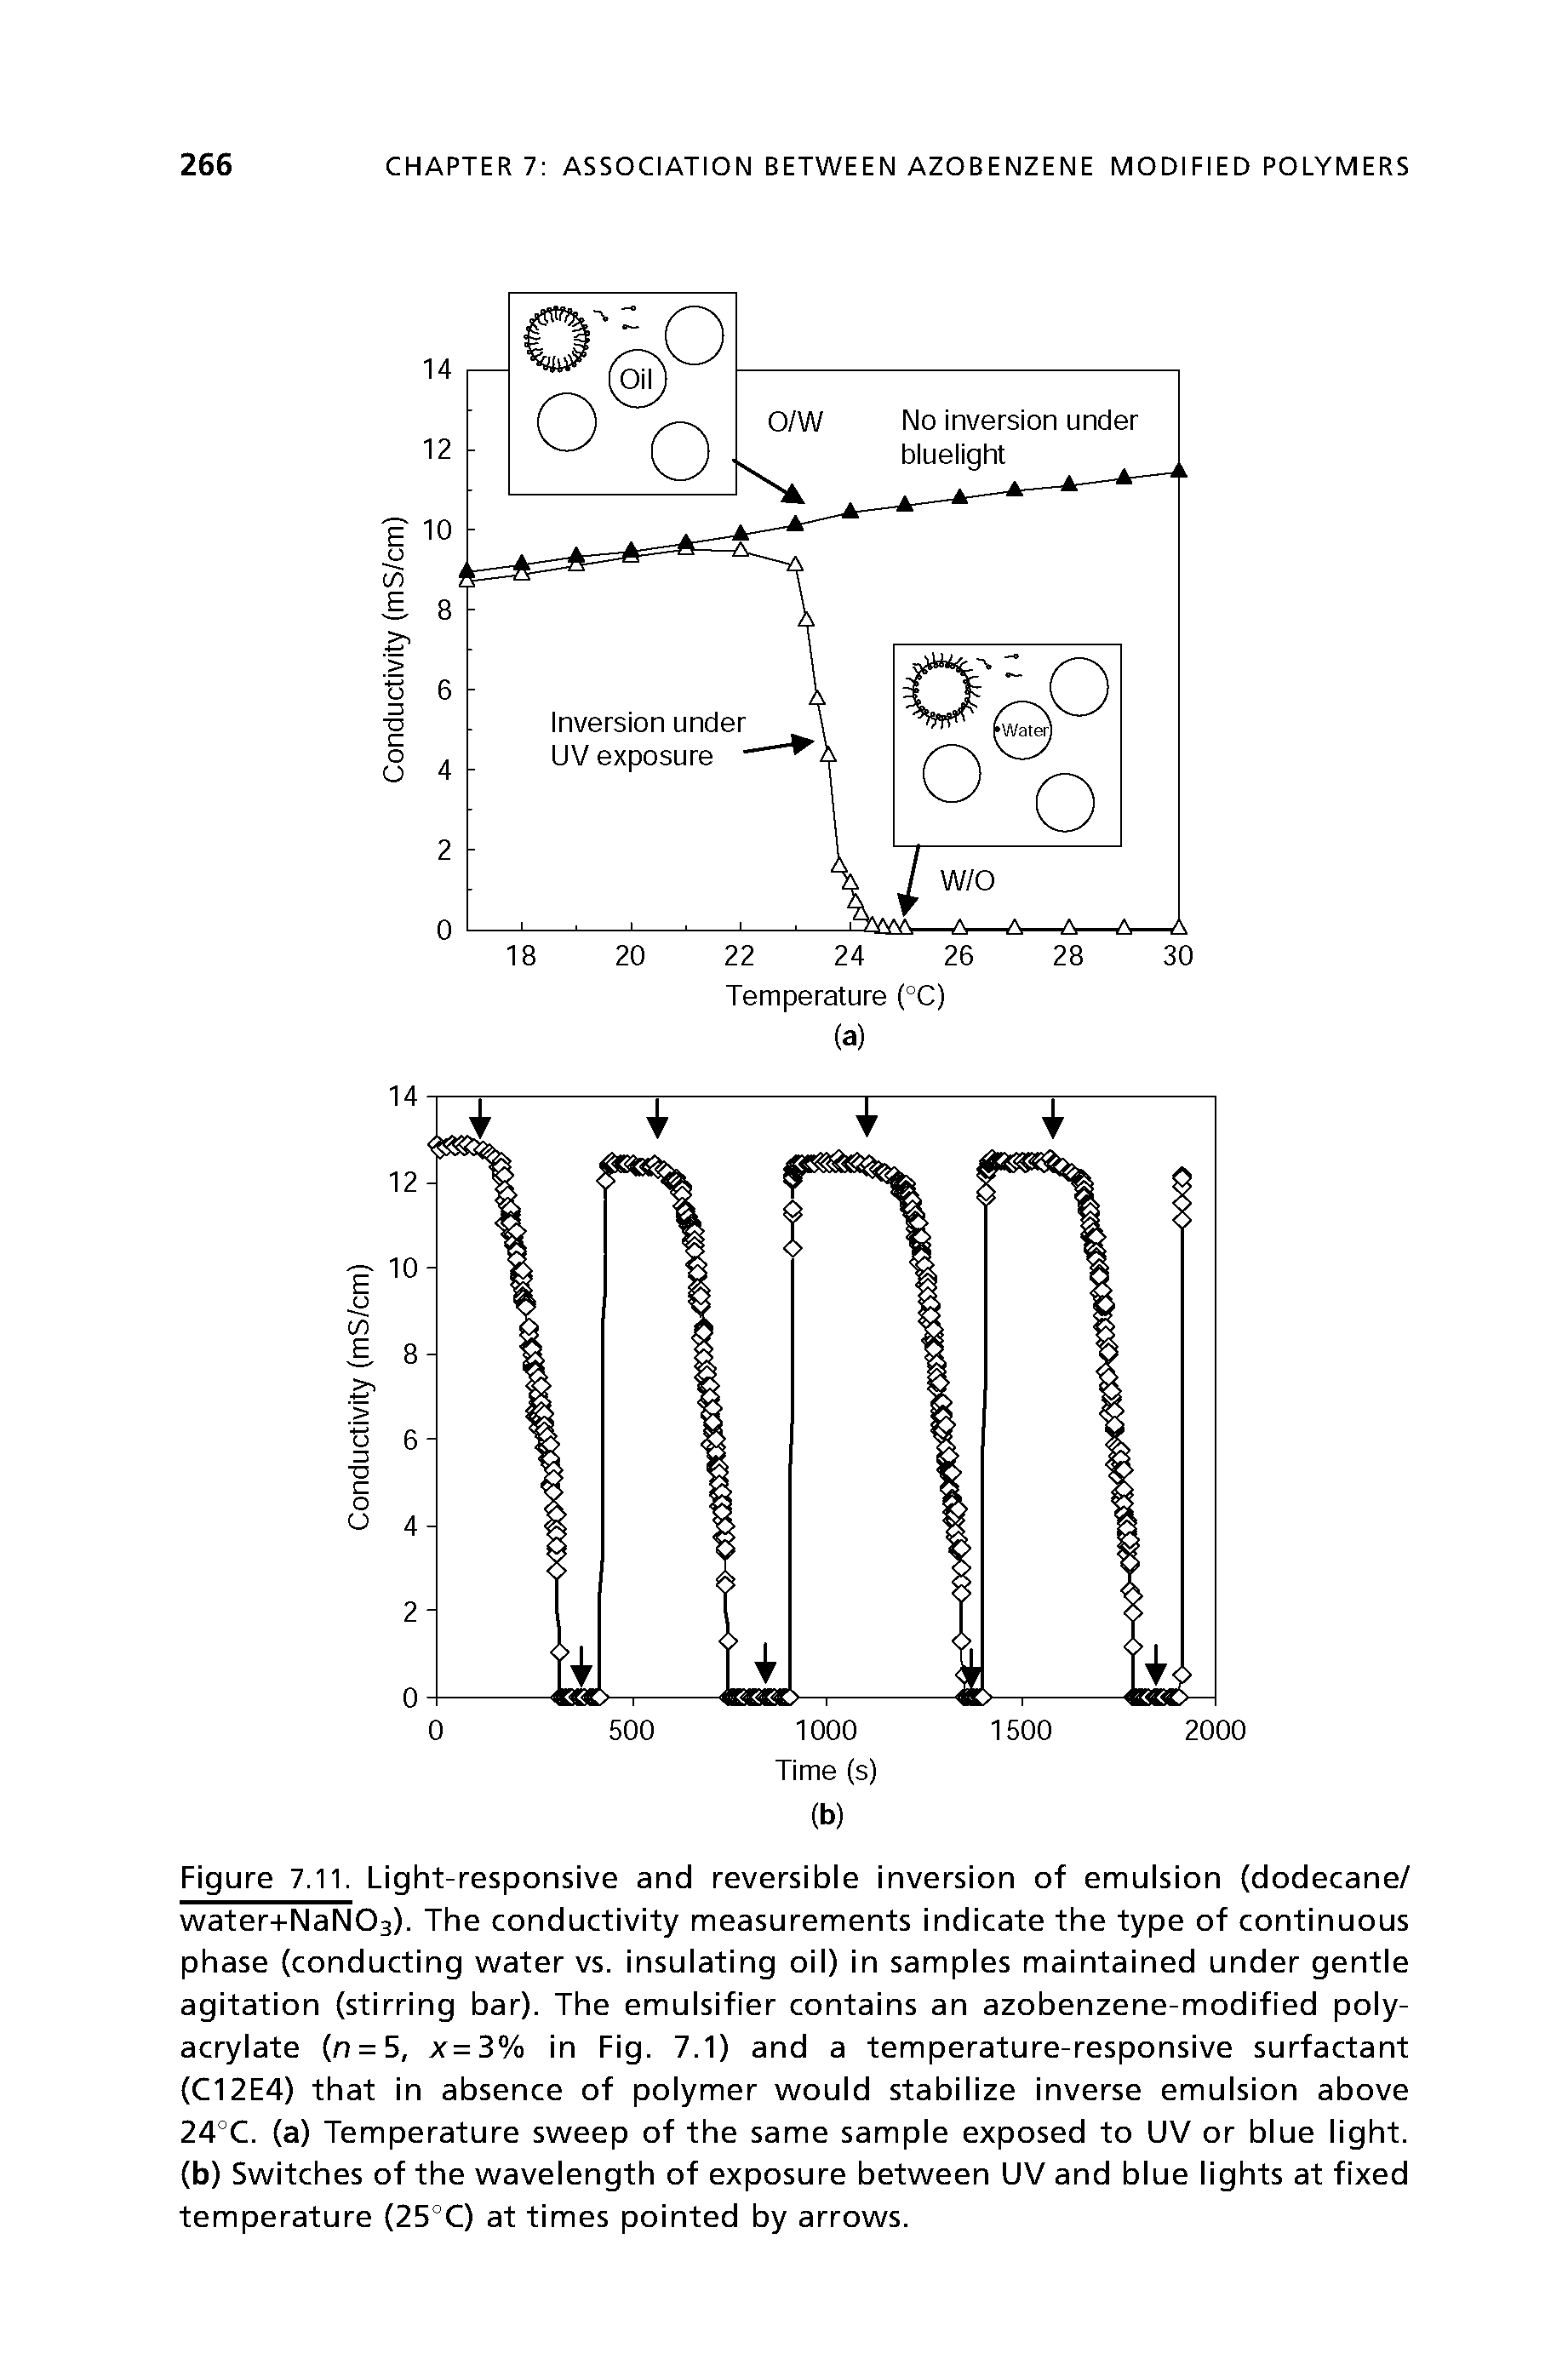 Figure 7.11. Light-responsive and reversible inversion of emulsion (dodecane/ water+NaNOs). The conductivity measurements indicate the type of continuous phase (conducting water vs. insulating oil) in samples maintained under gentle agitation (stirring bar). The emulsifier contains an azobenzene-modified polyacrylate (n = 5, x=3% in Fig. 7.1) and a temperature-responsive surfactant (C12E4) that in absence of polymer would stabilize inverse emulsion above 24°C. (a) Temperature sweep of the same sample exposed to UV or blue light, (b) Switches of the wavelength of exposure between UV and blue lights at fixed temperature (25°C) at times pointed by arrows.